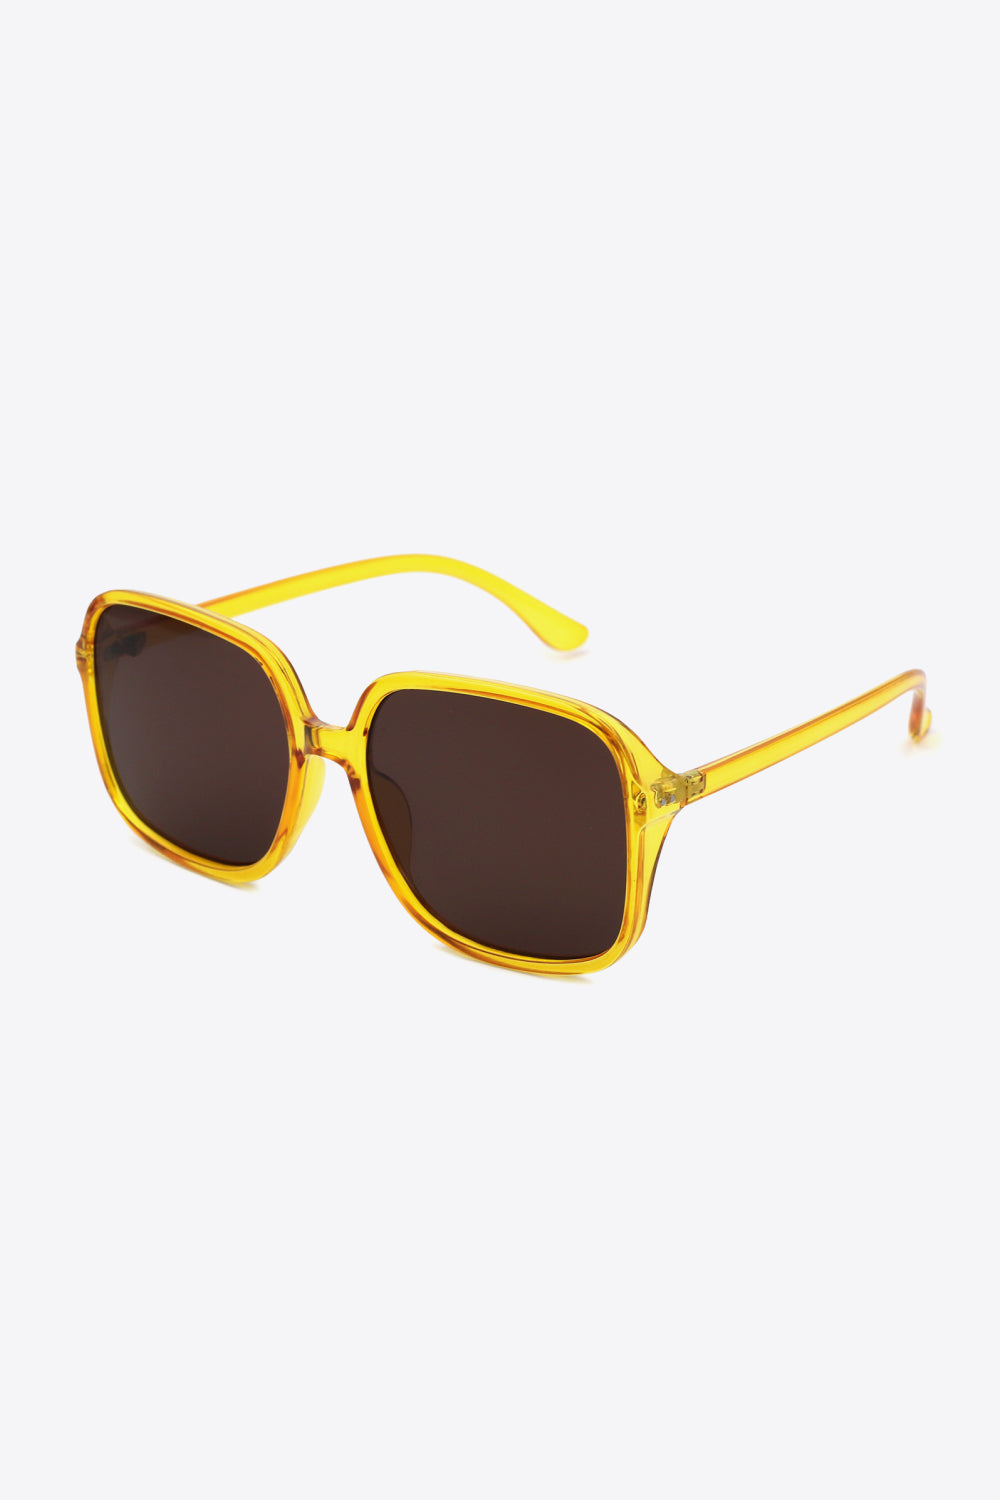 Vibrant Vision Square Frame Sunglasses in Green, Black, Yellow, and Red